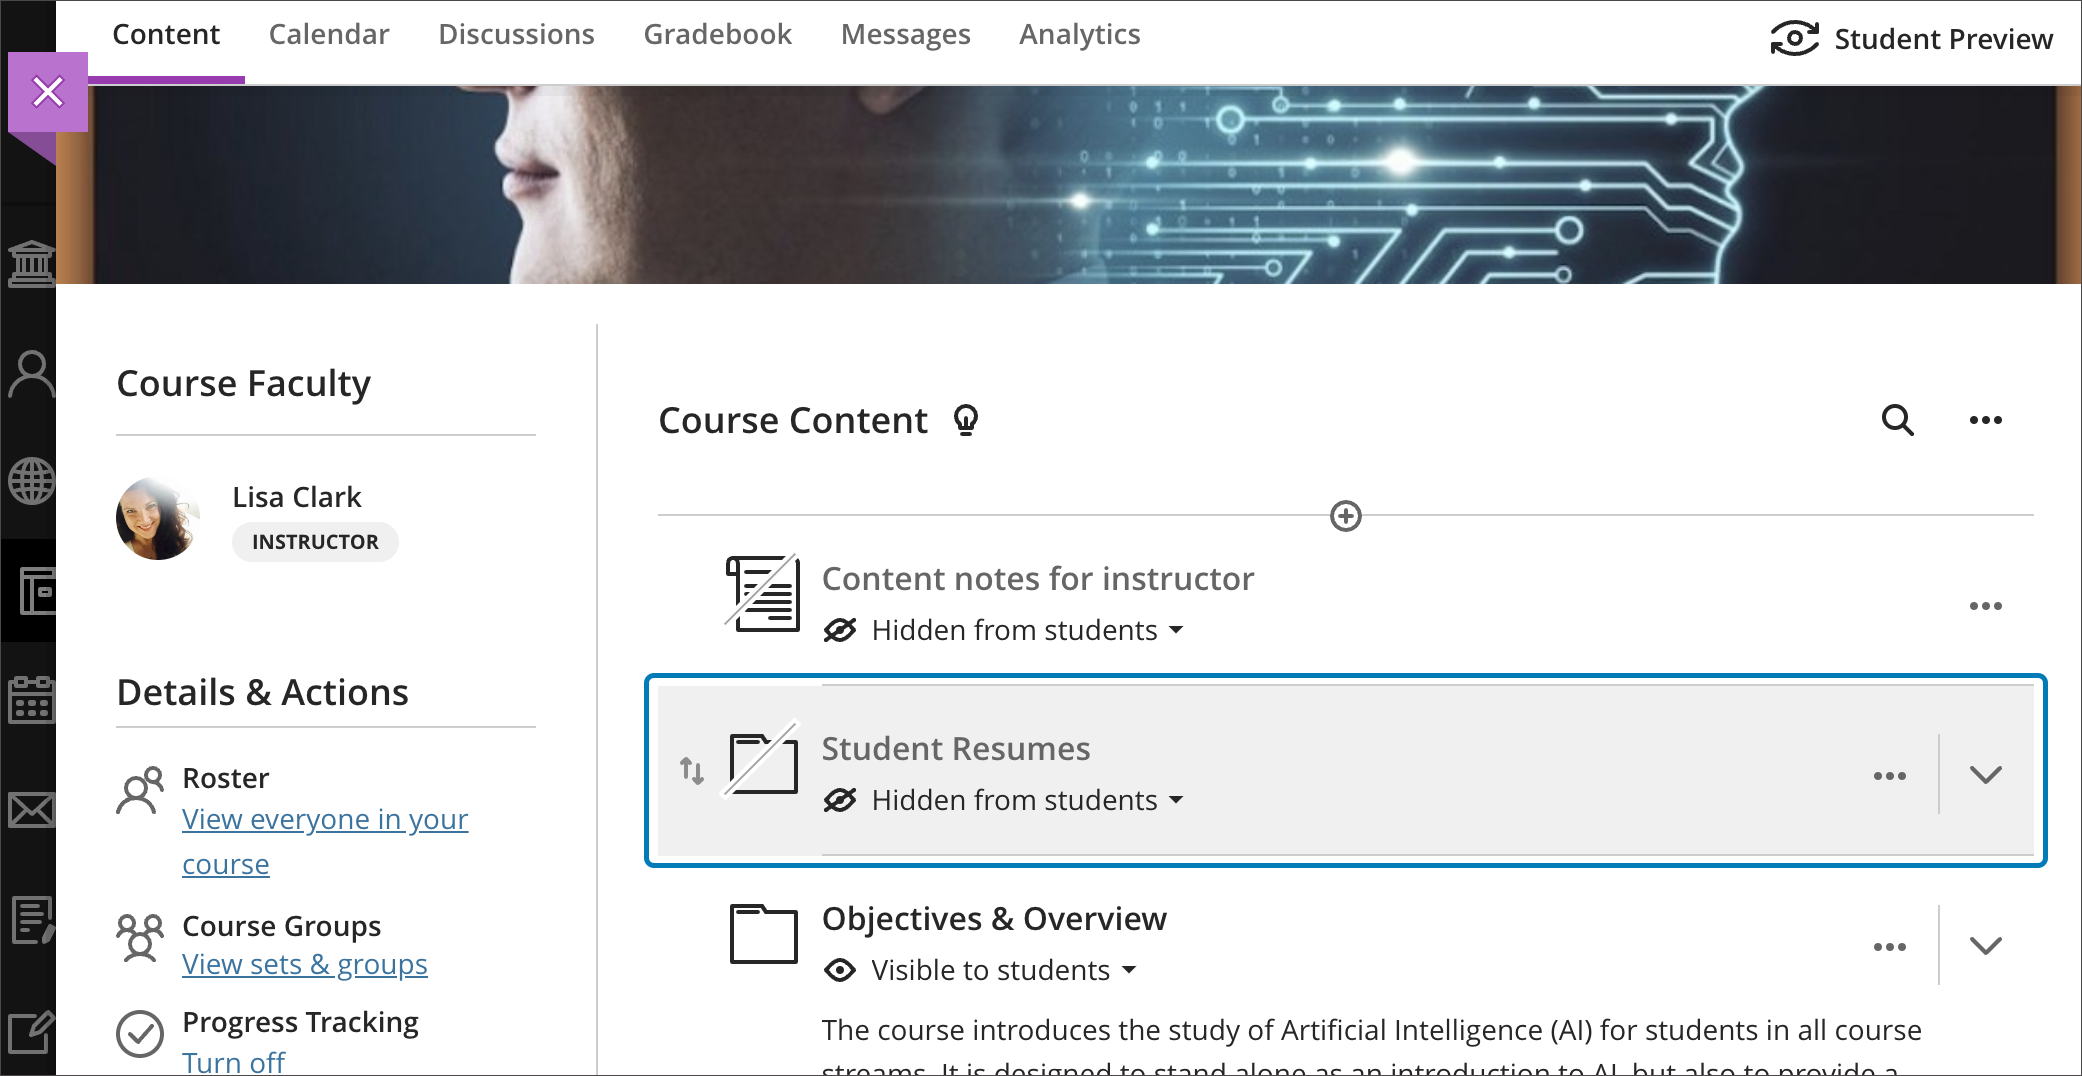 Folder added to the Course Content page